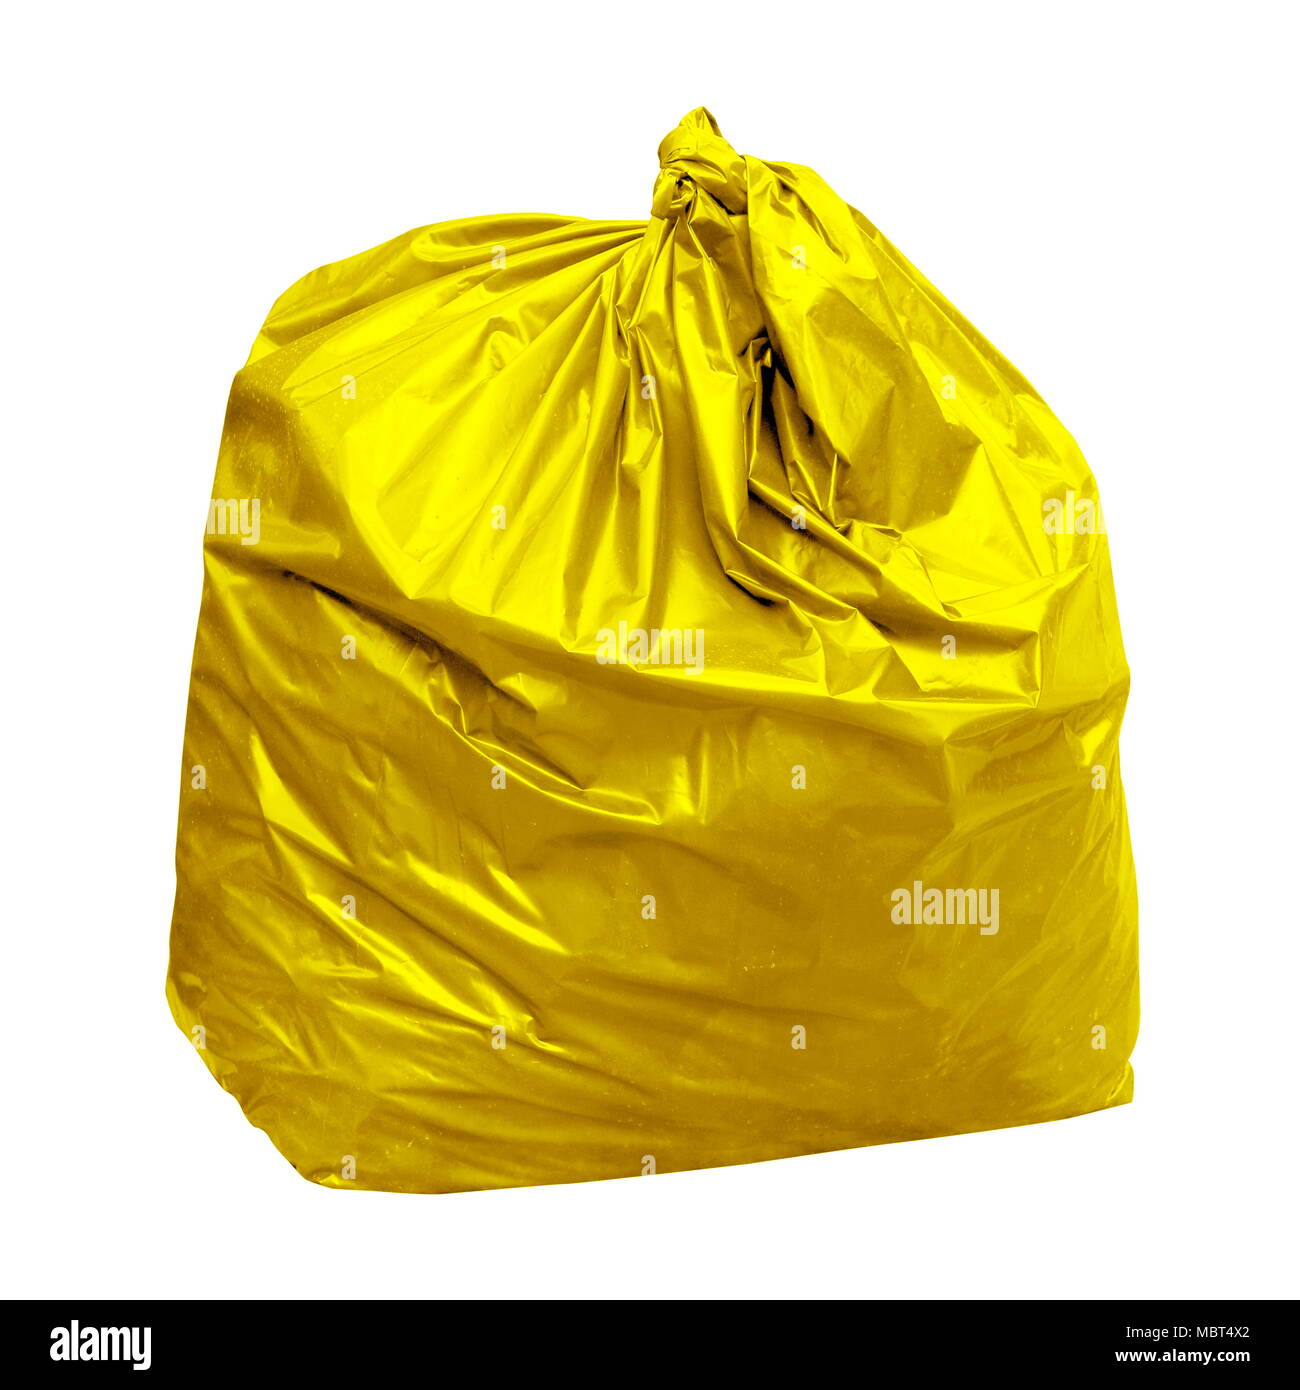 yellow garbage bag with concept the color of yellow garbage bags is recyclable waste (isolated on white background) Stock Photo